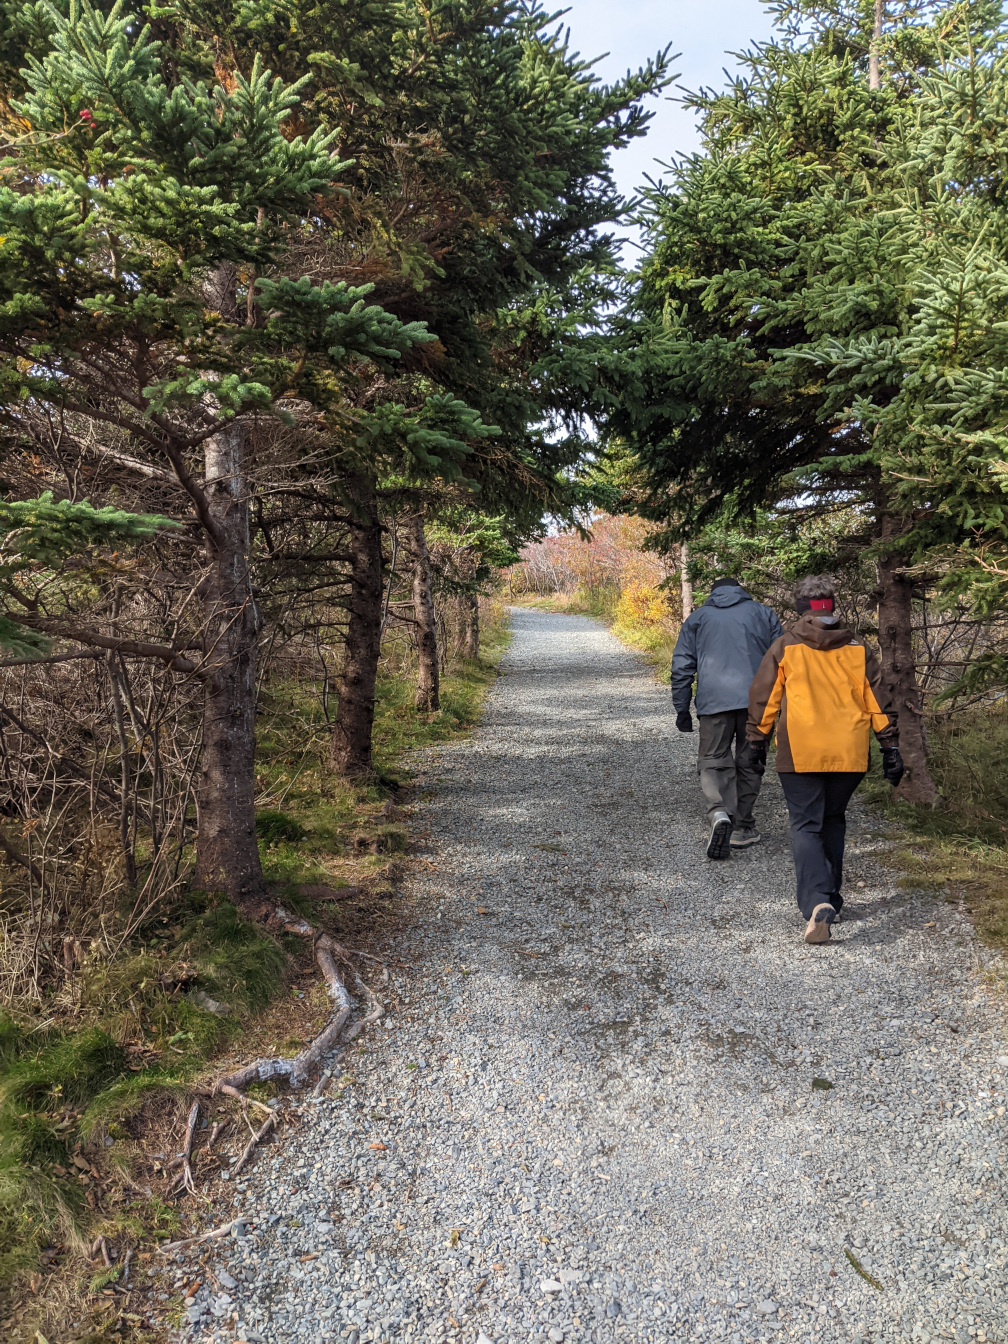 2 People Walking on Pathway in Forest